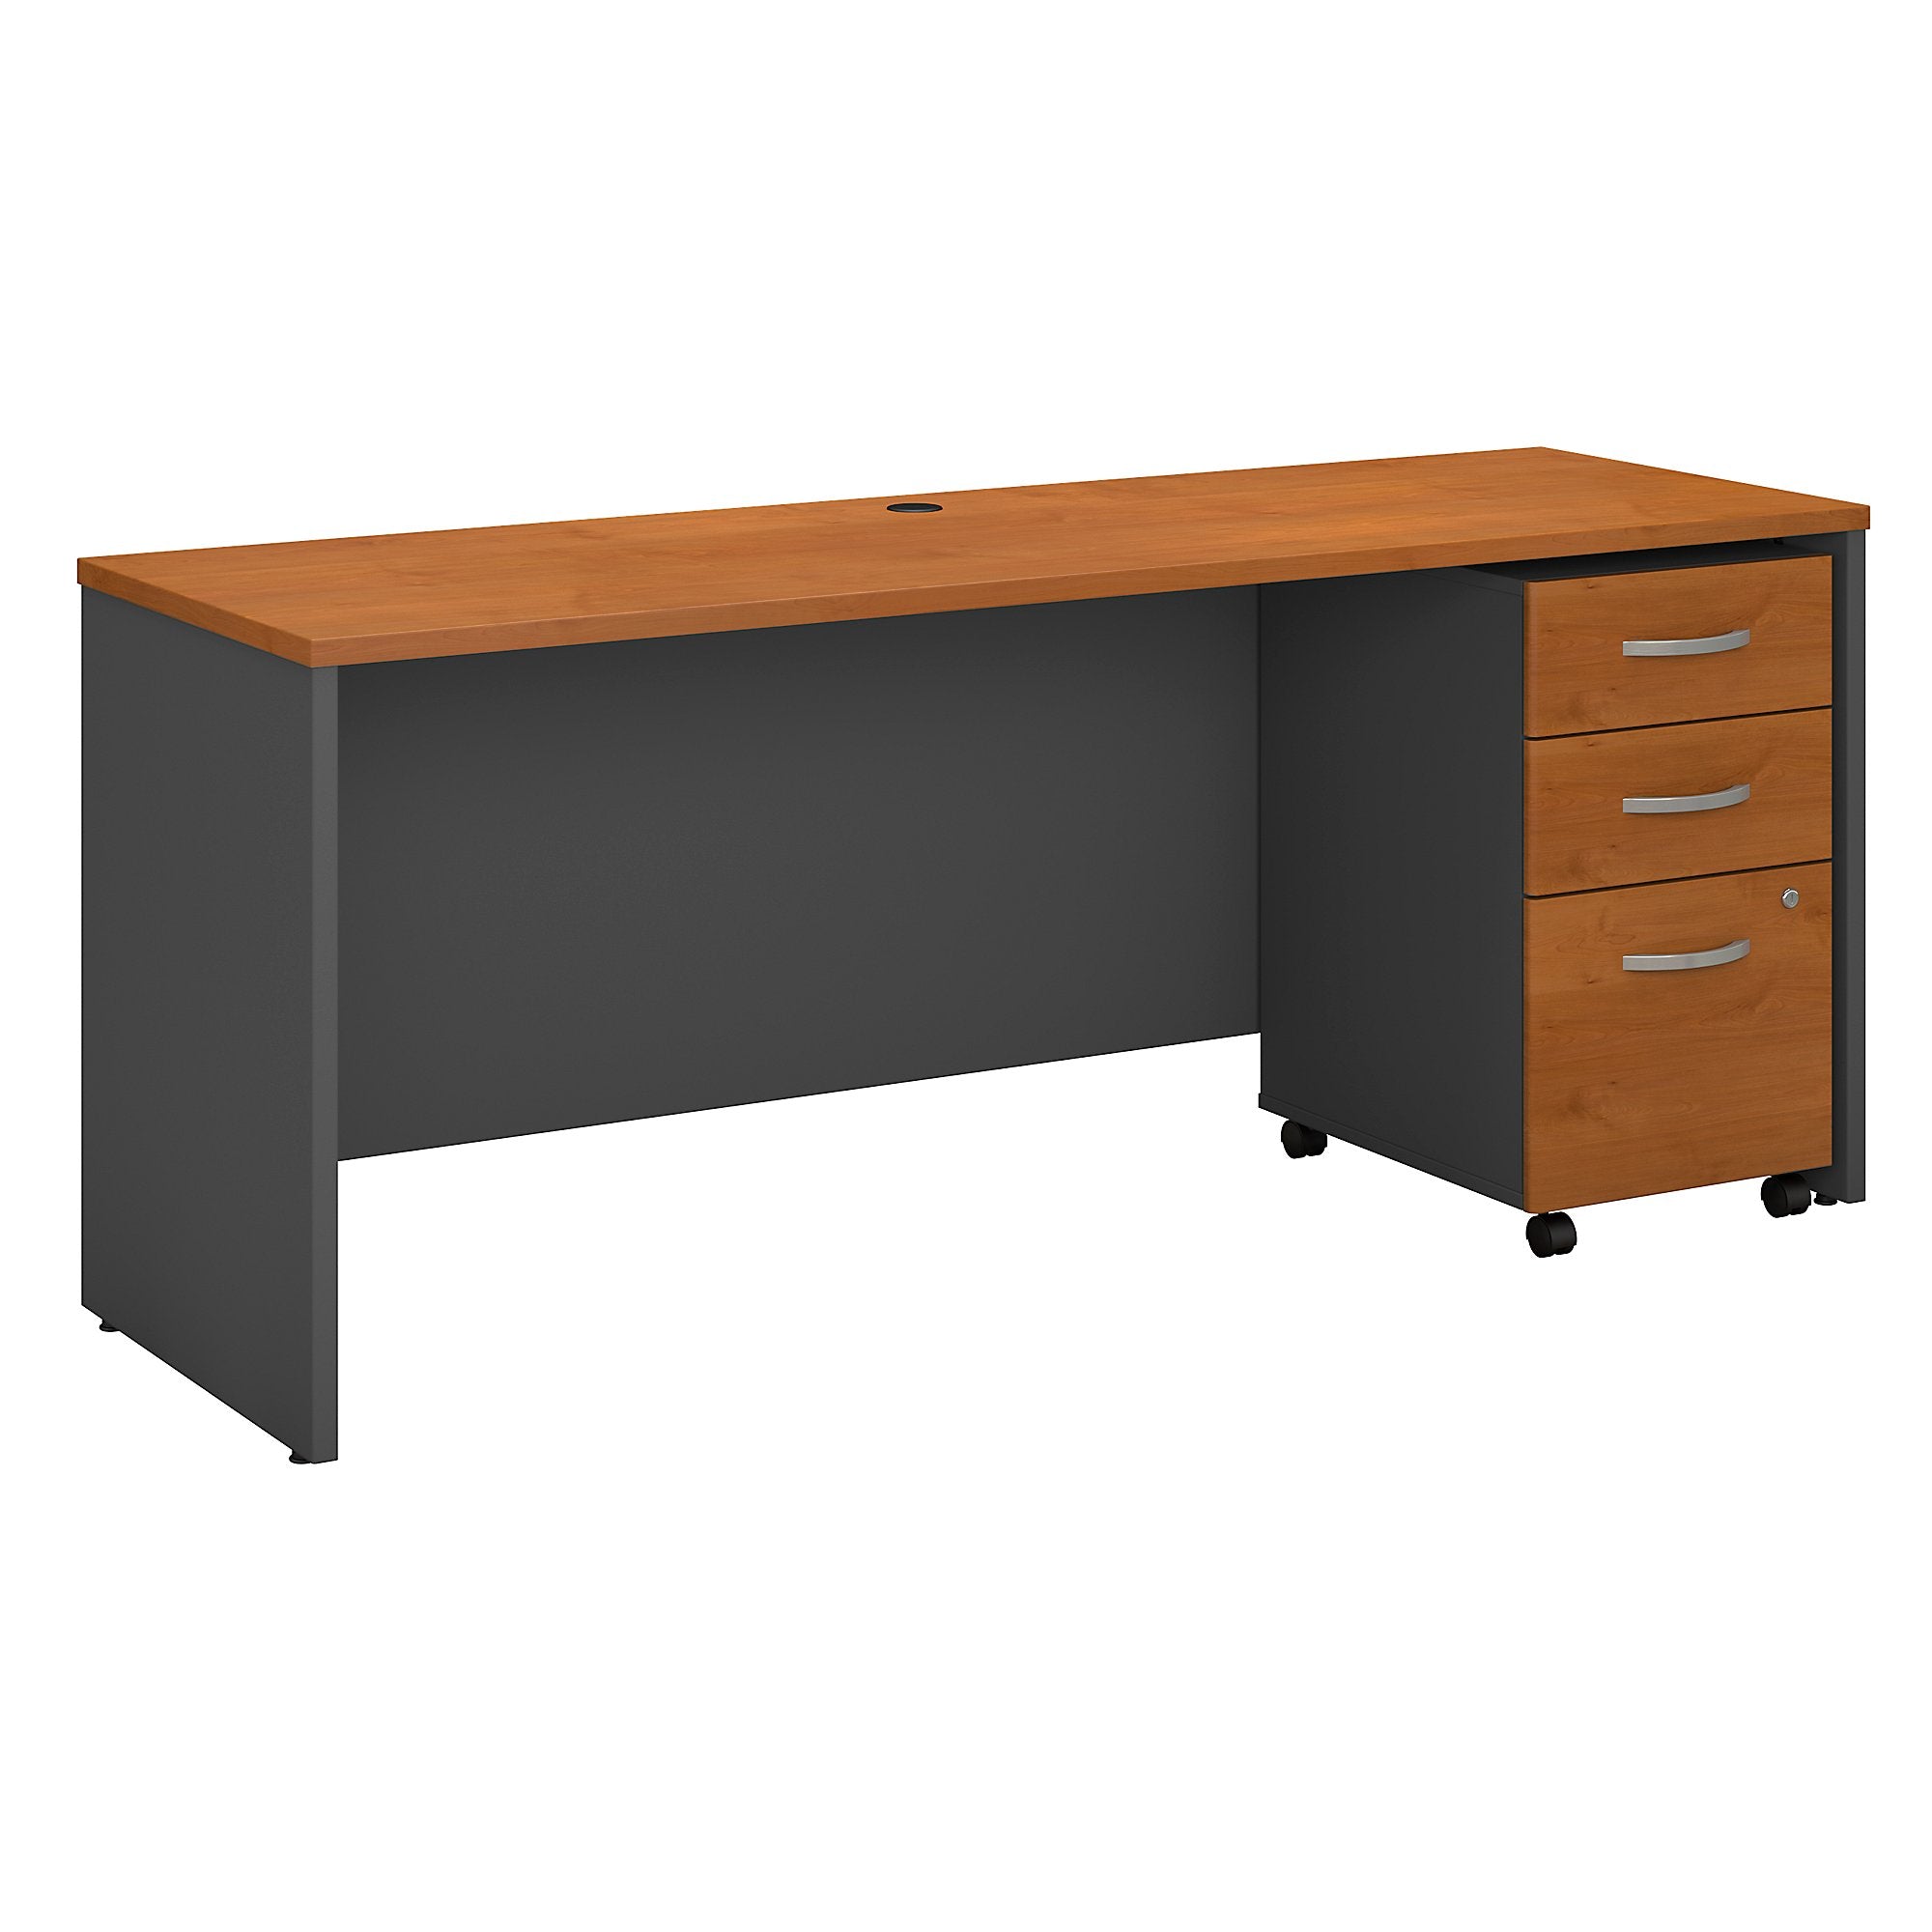 Bush Business Furniture Series C 72W x 24D Office Desk with Mobile File Cabinet | Natural Cherry/Graphite Gray